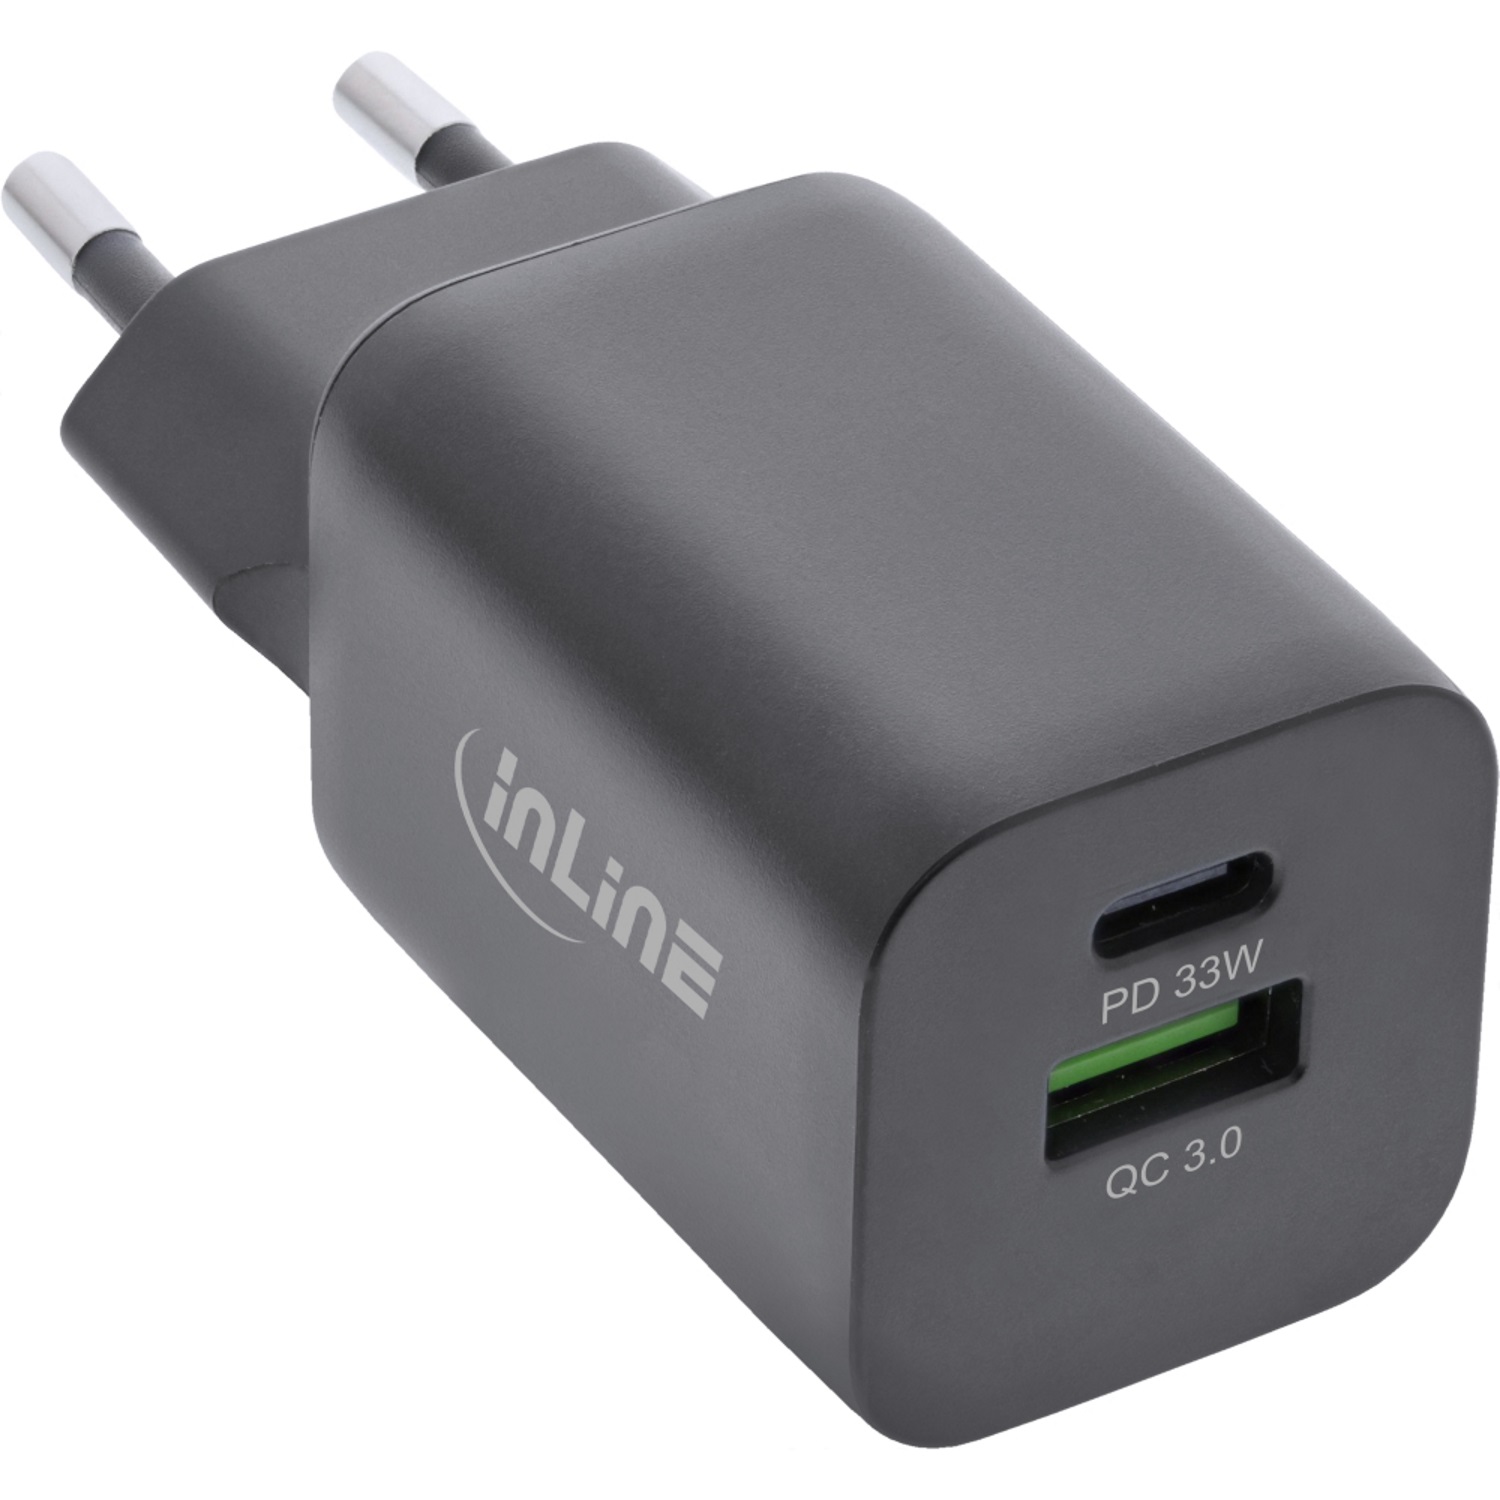 USB power supply/charger 33W, black